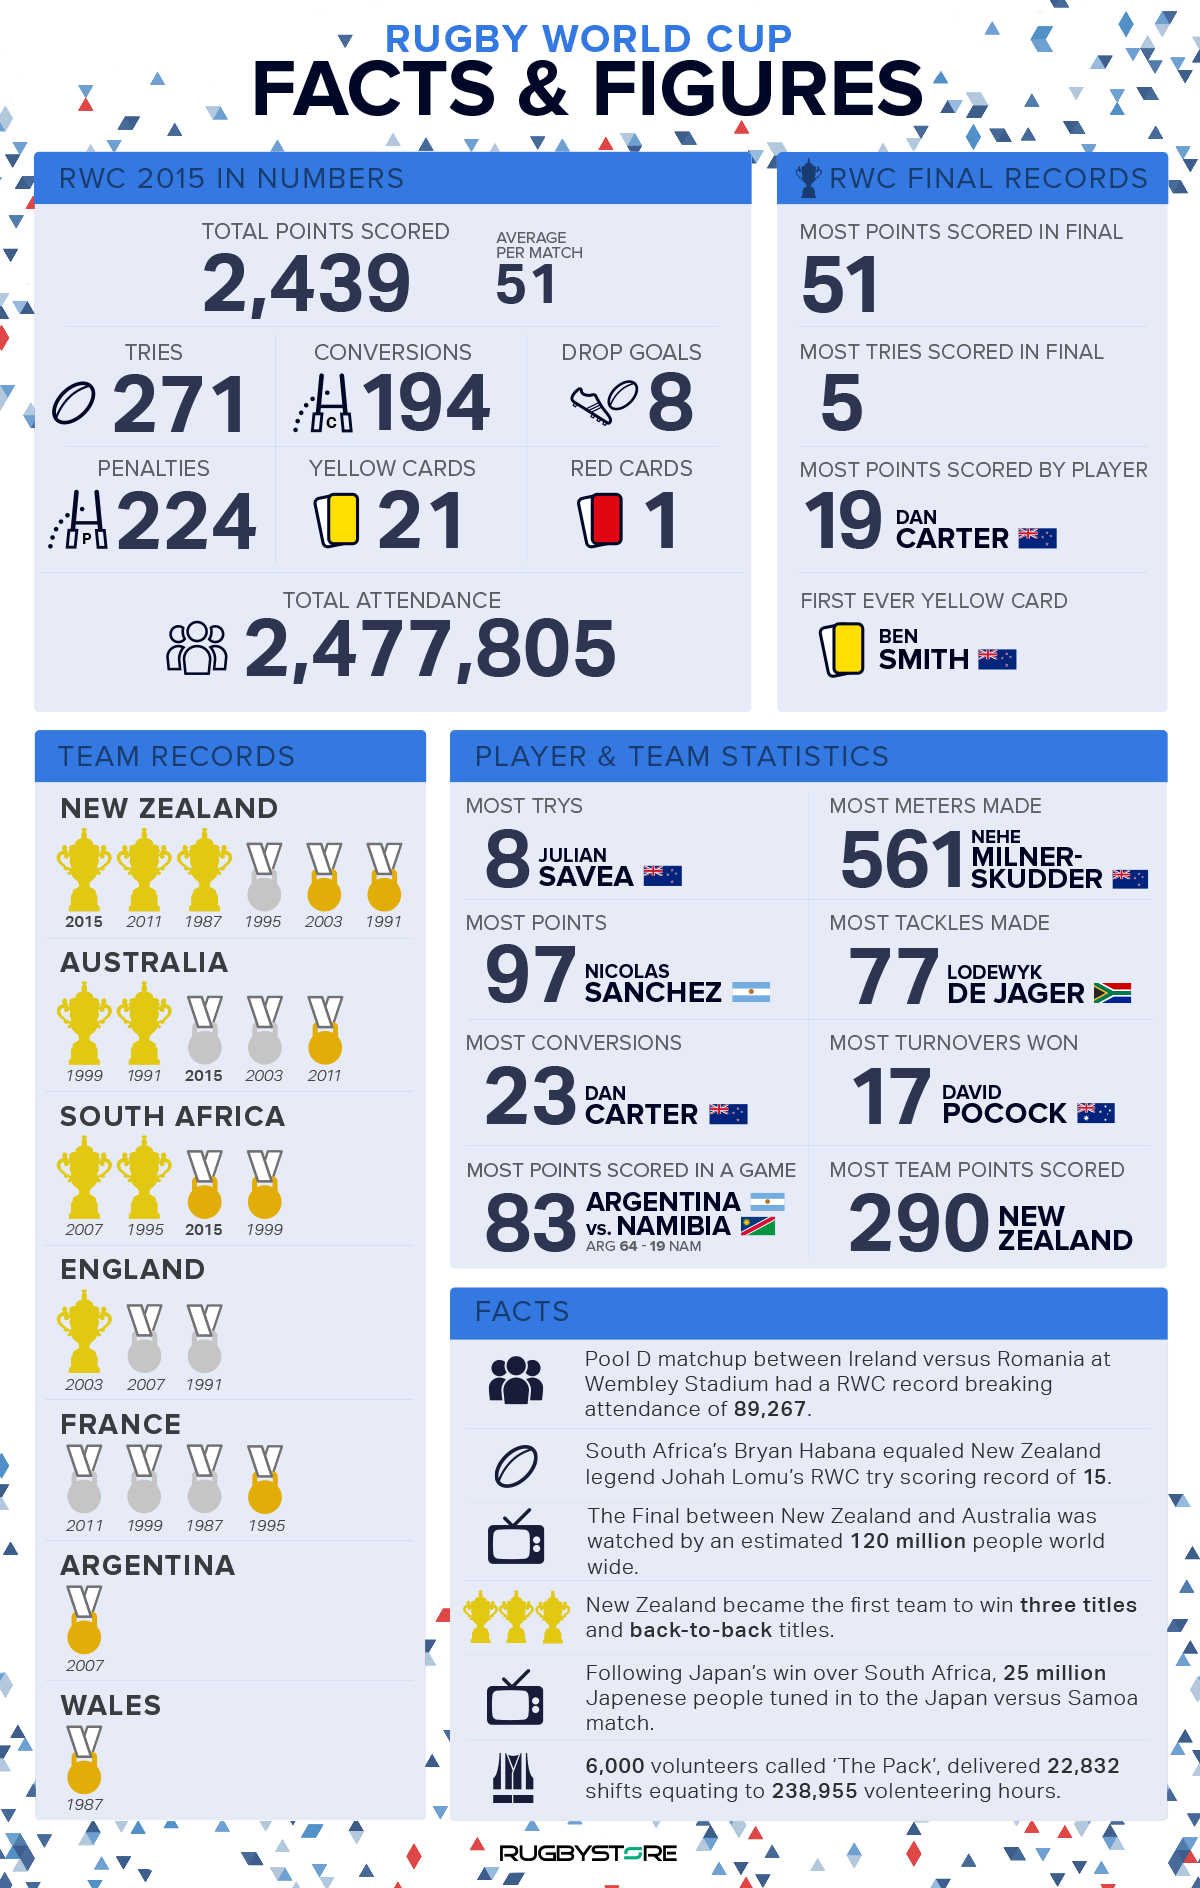 Rugby World Cup Facts and Figures Infographic